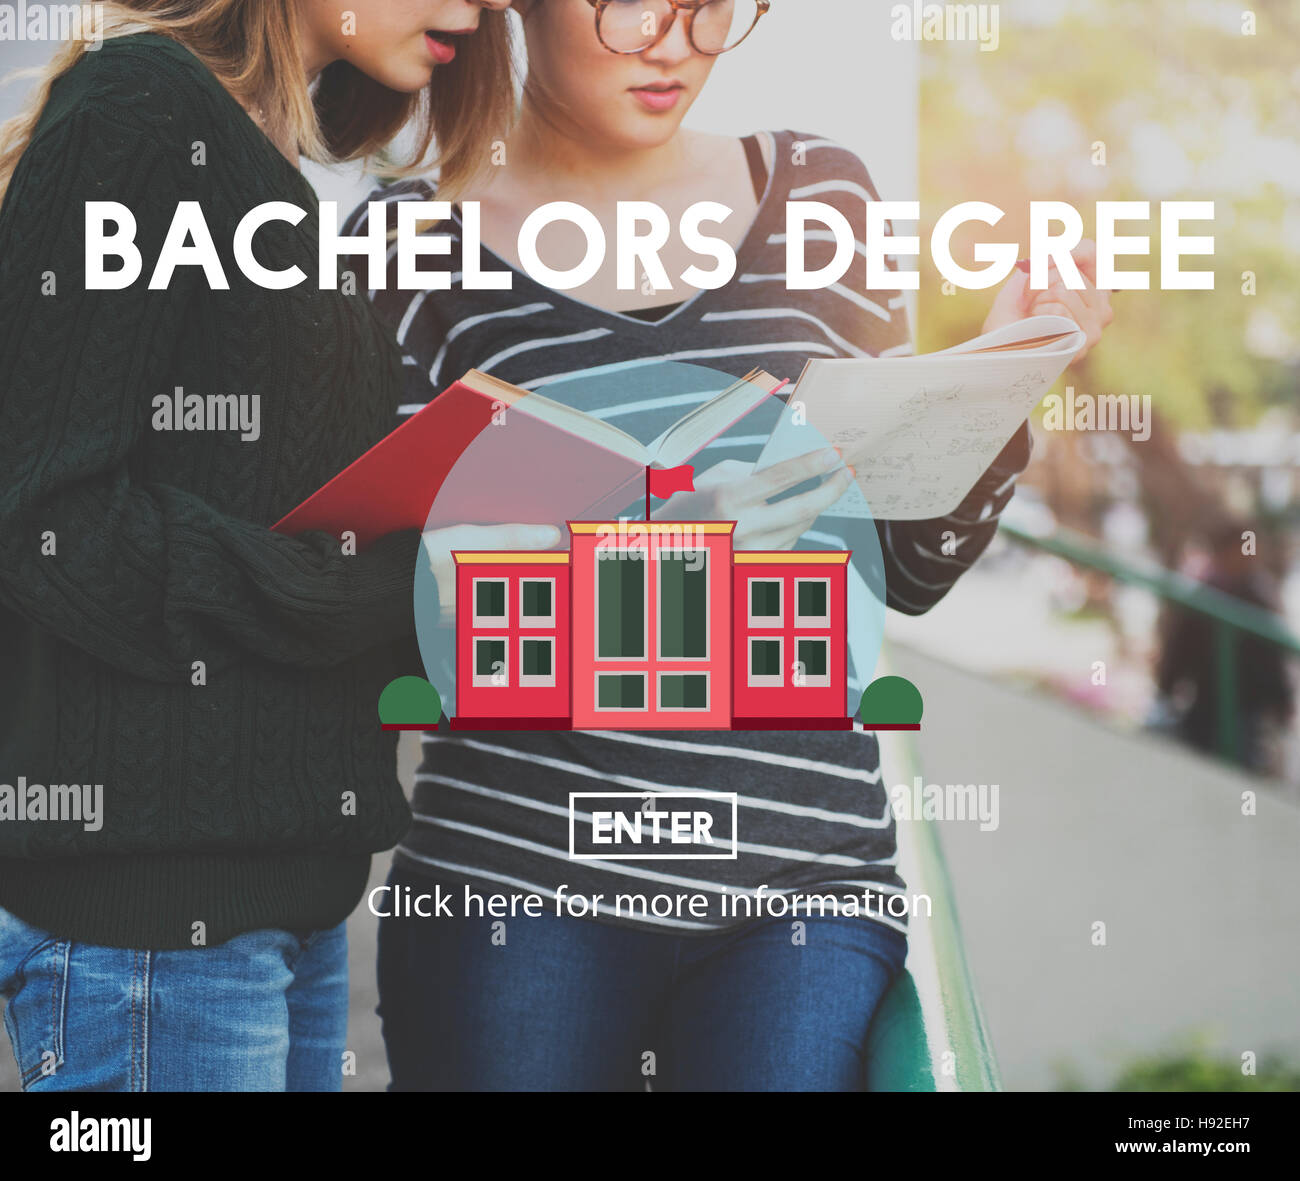 Academic College Bachelor Degree Admission Concept Stock Photo